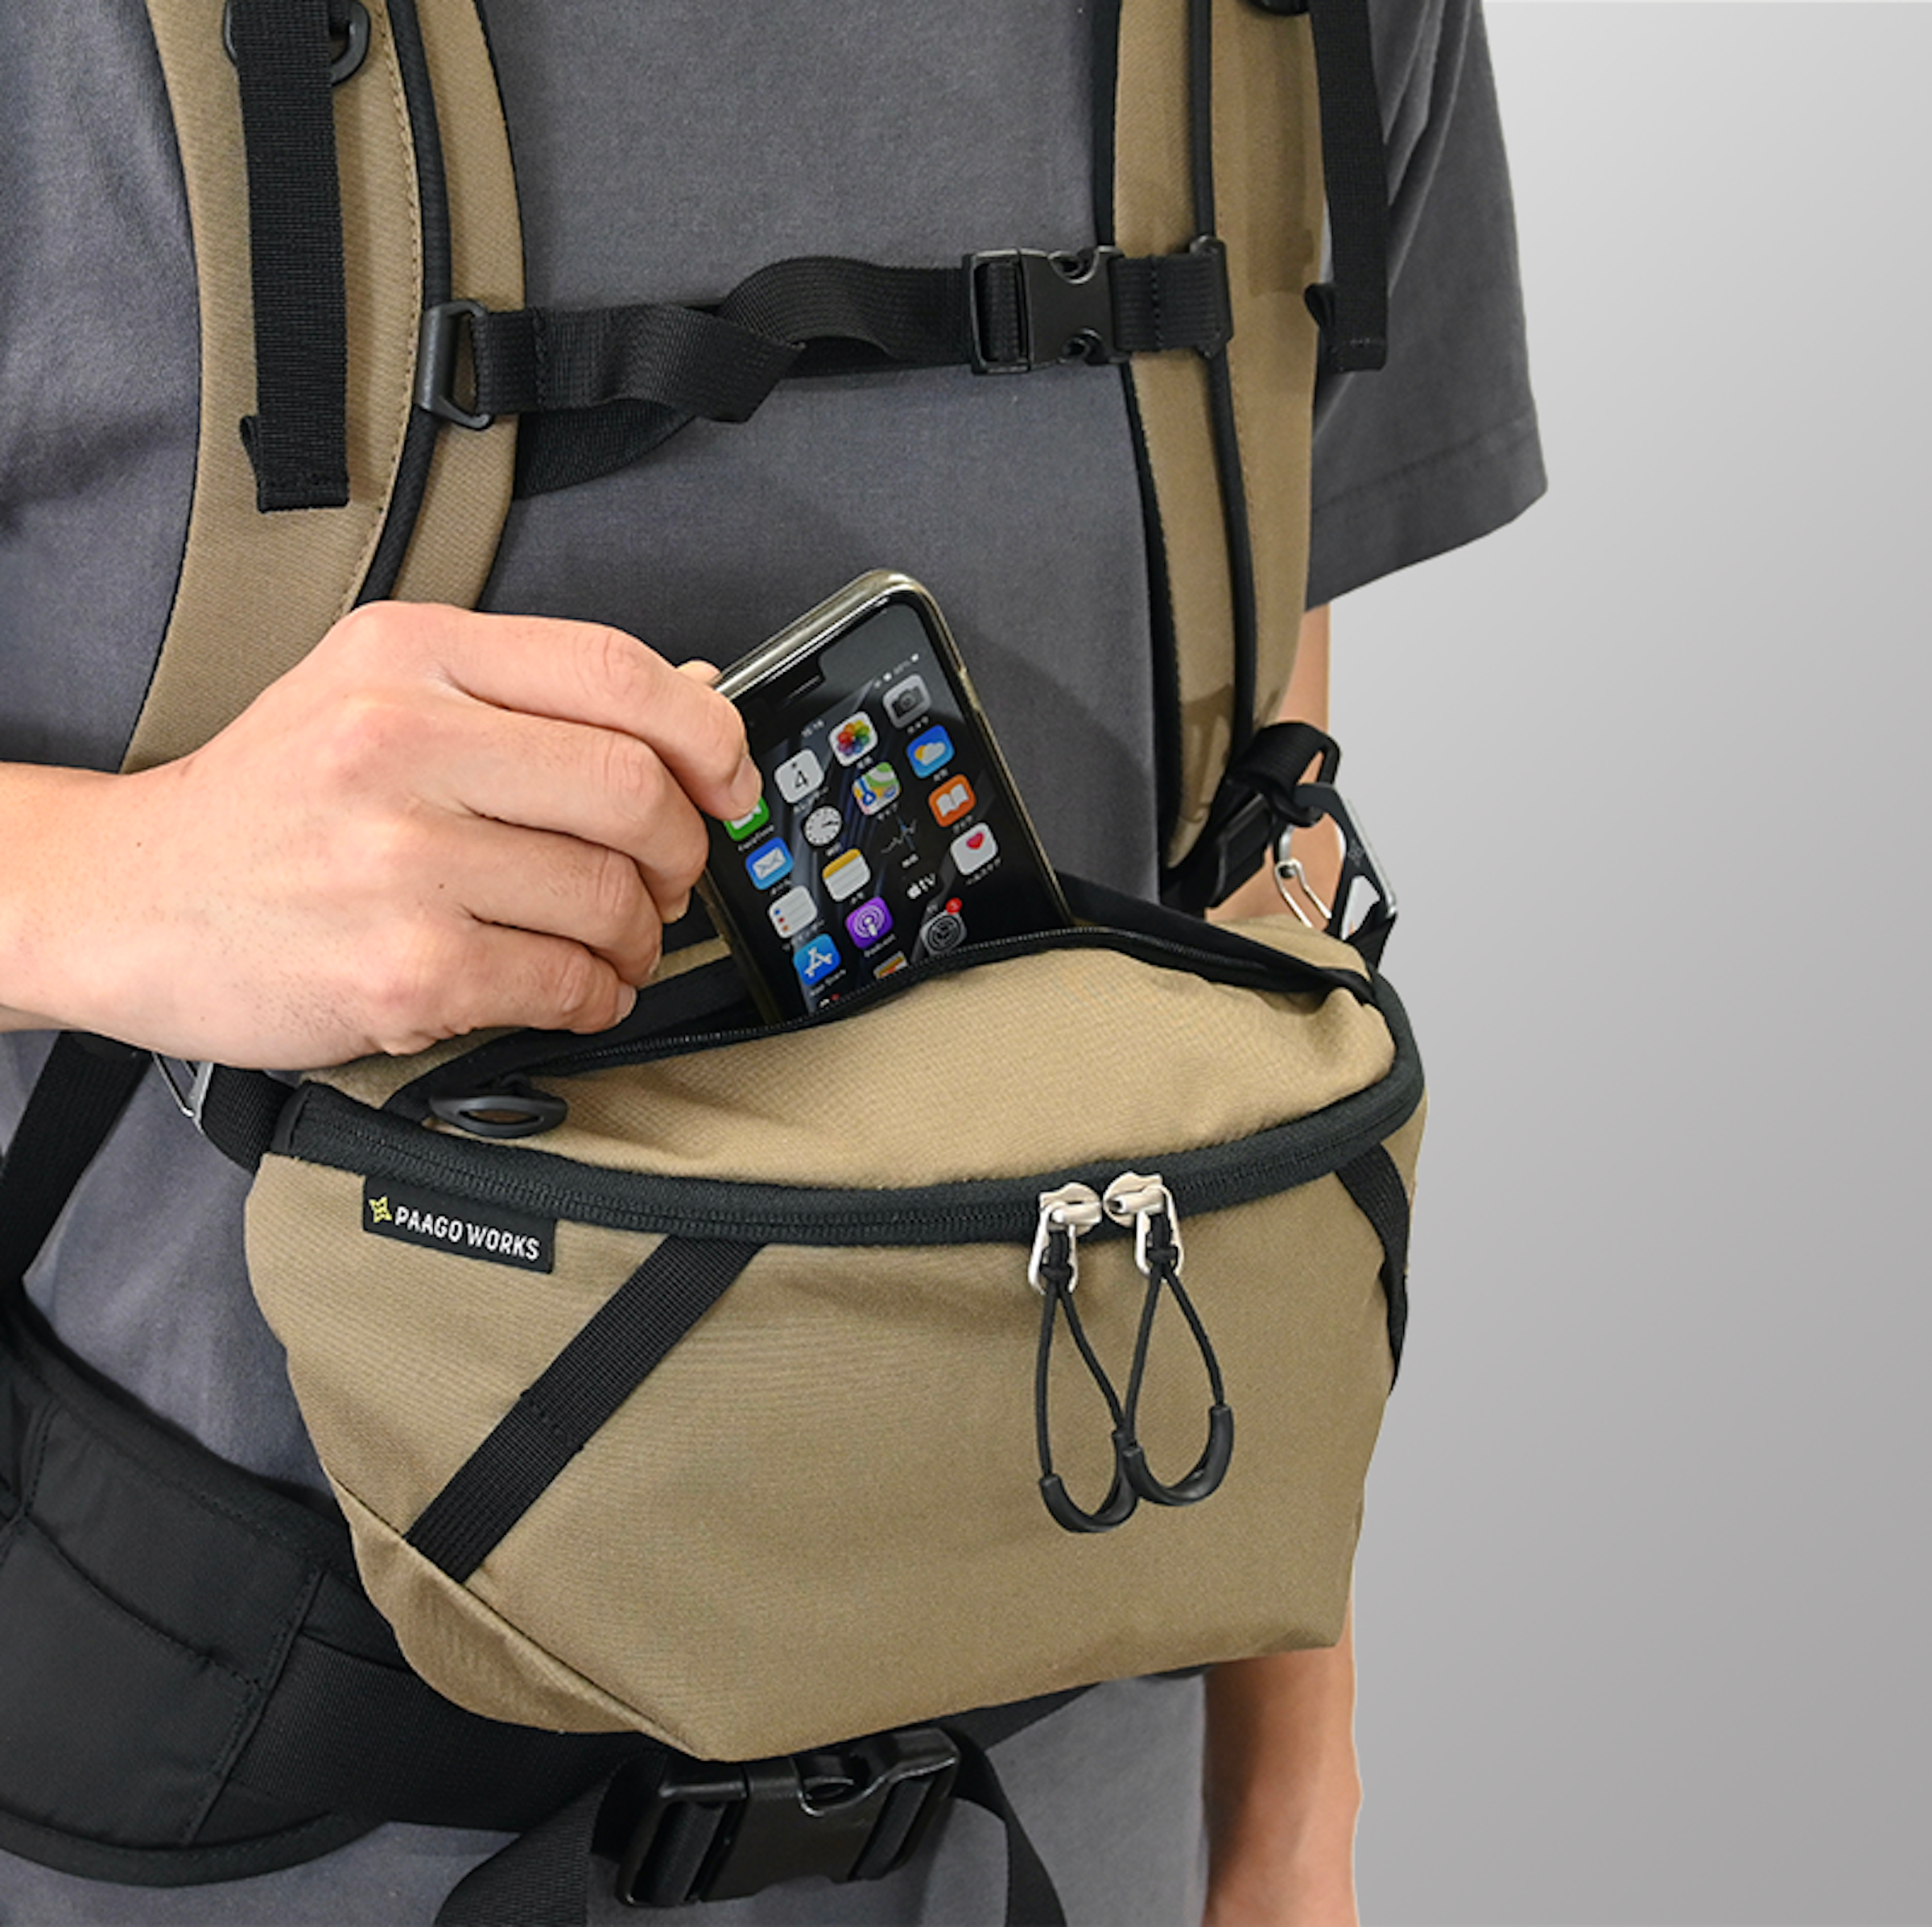 The pocket on the body side is compact, and the structure allows the front side to be used relatively comfortably. The surface design is subdued, but there is a practical gear loop (where carabiners, etc. can be attached)